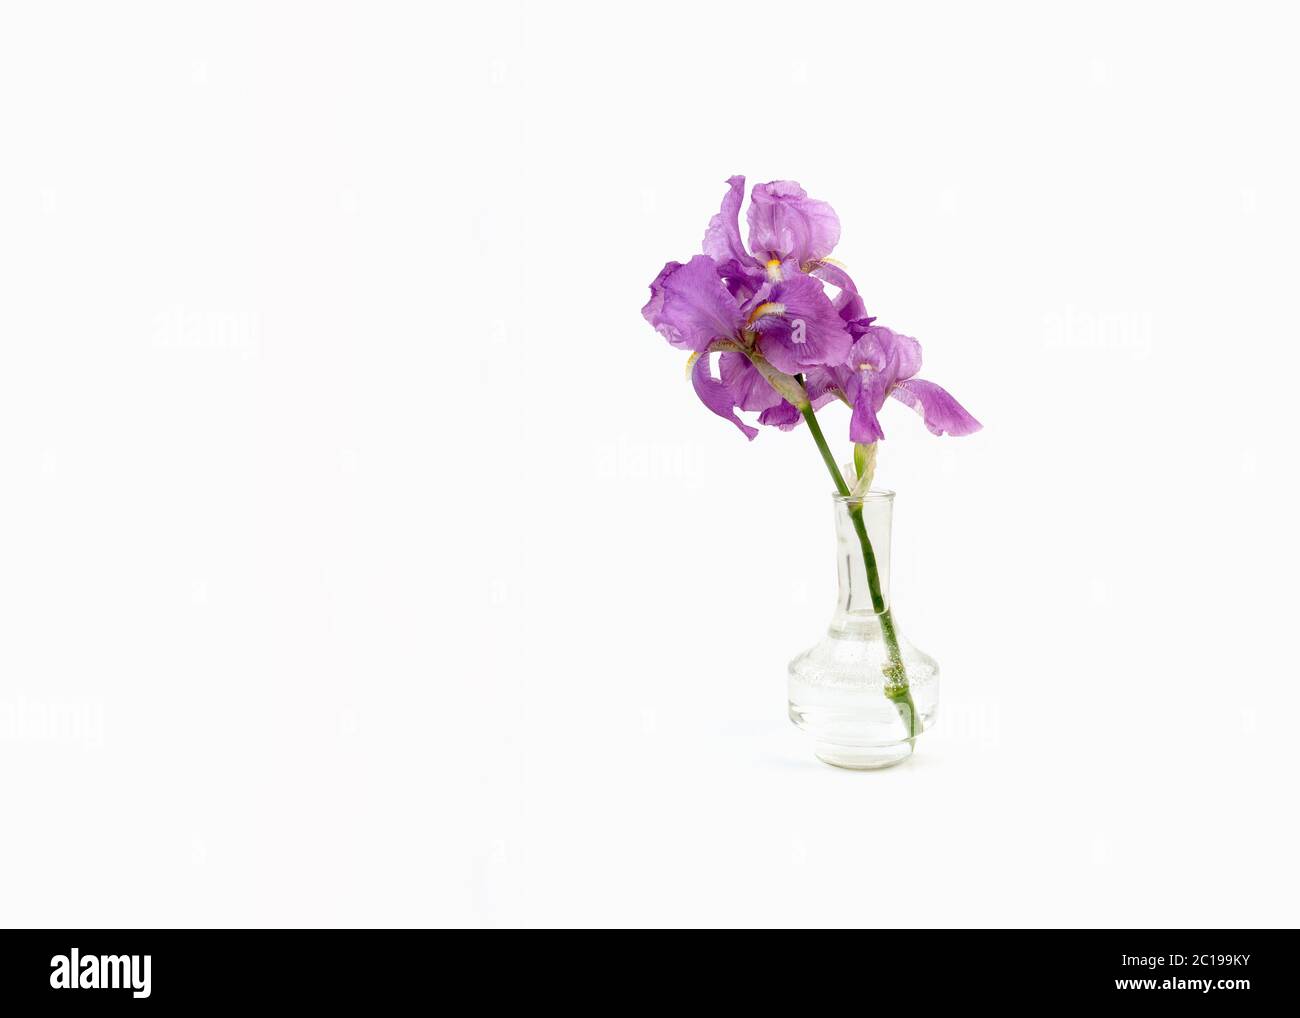 Still life with a beautiful fresh spring flower purple Iris in a glass vase bottle isolated on white background. Minimal art composition. Stock Photo